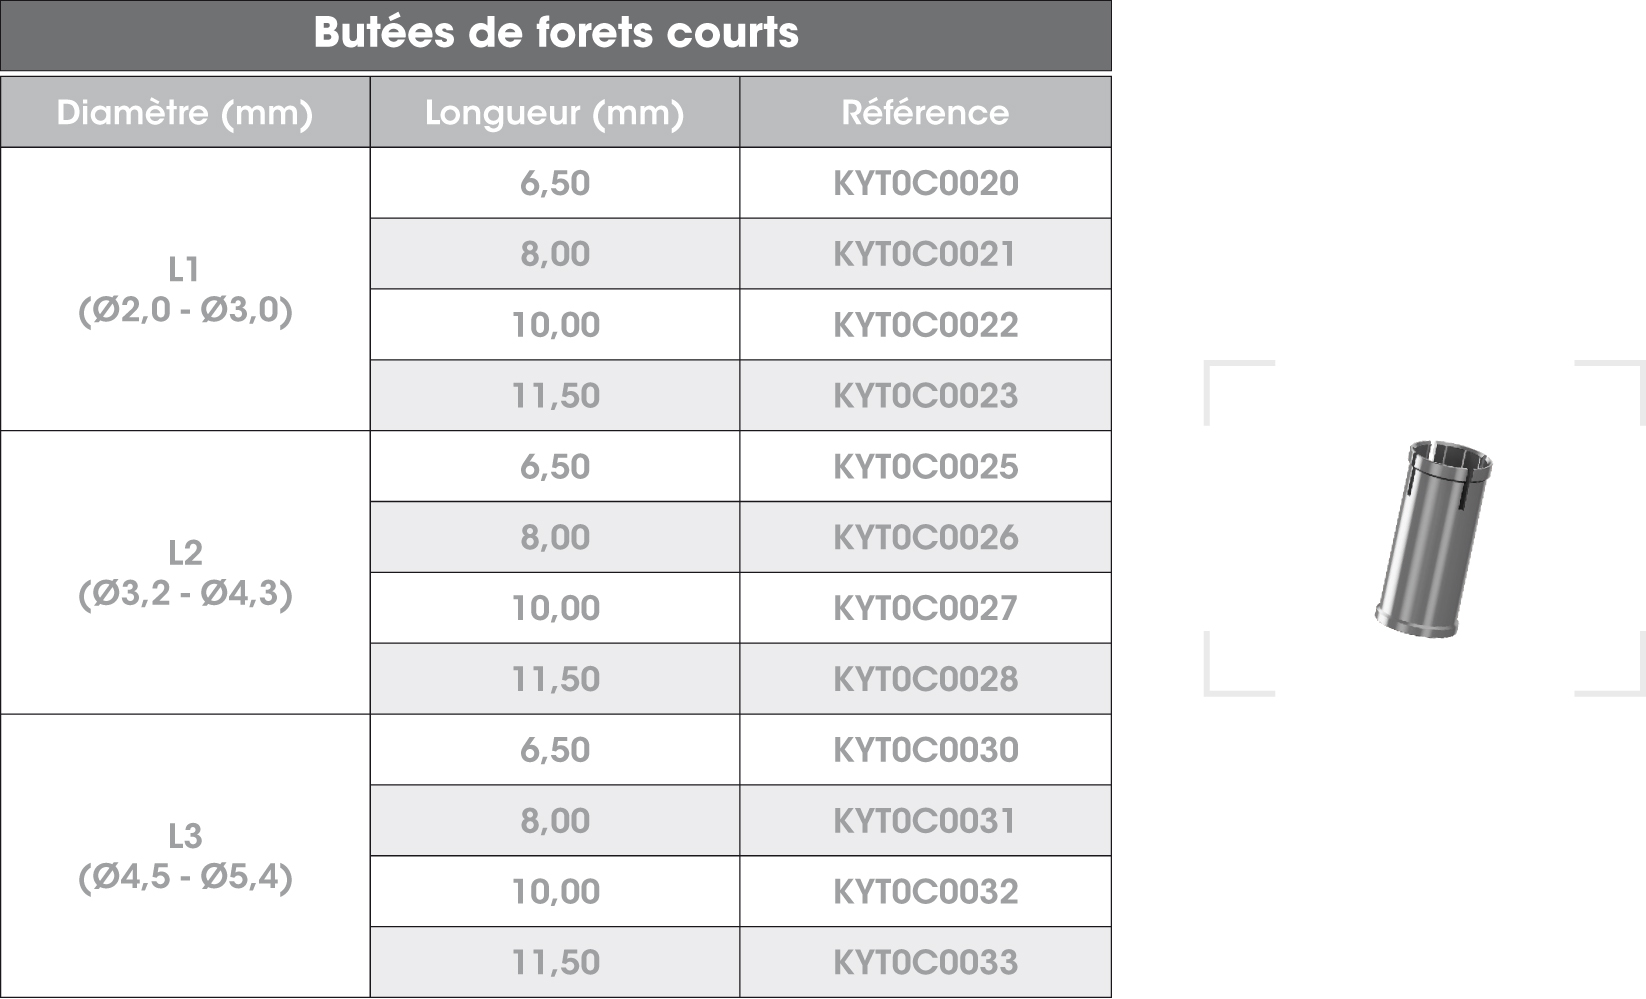 Butees-forets-courts